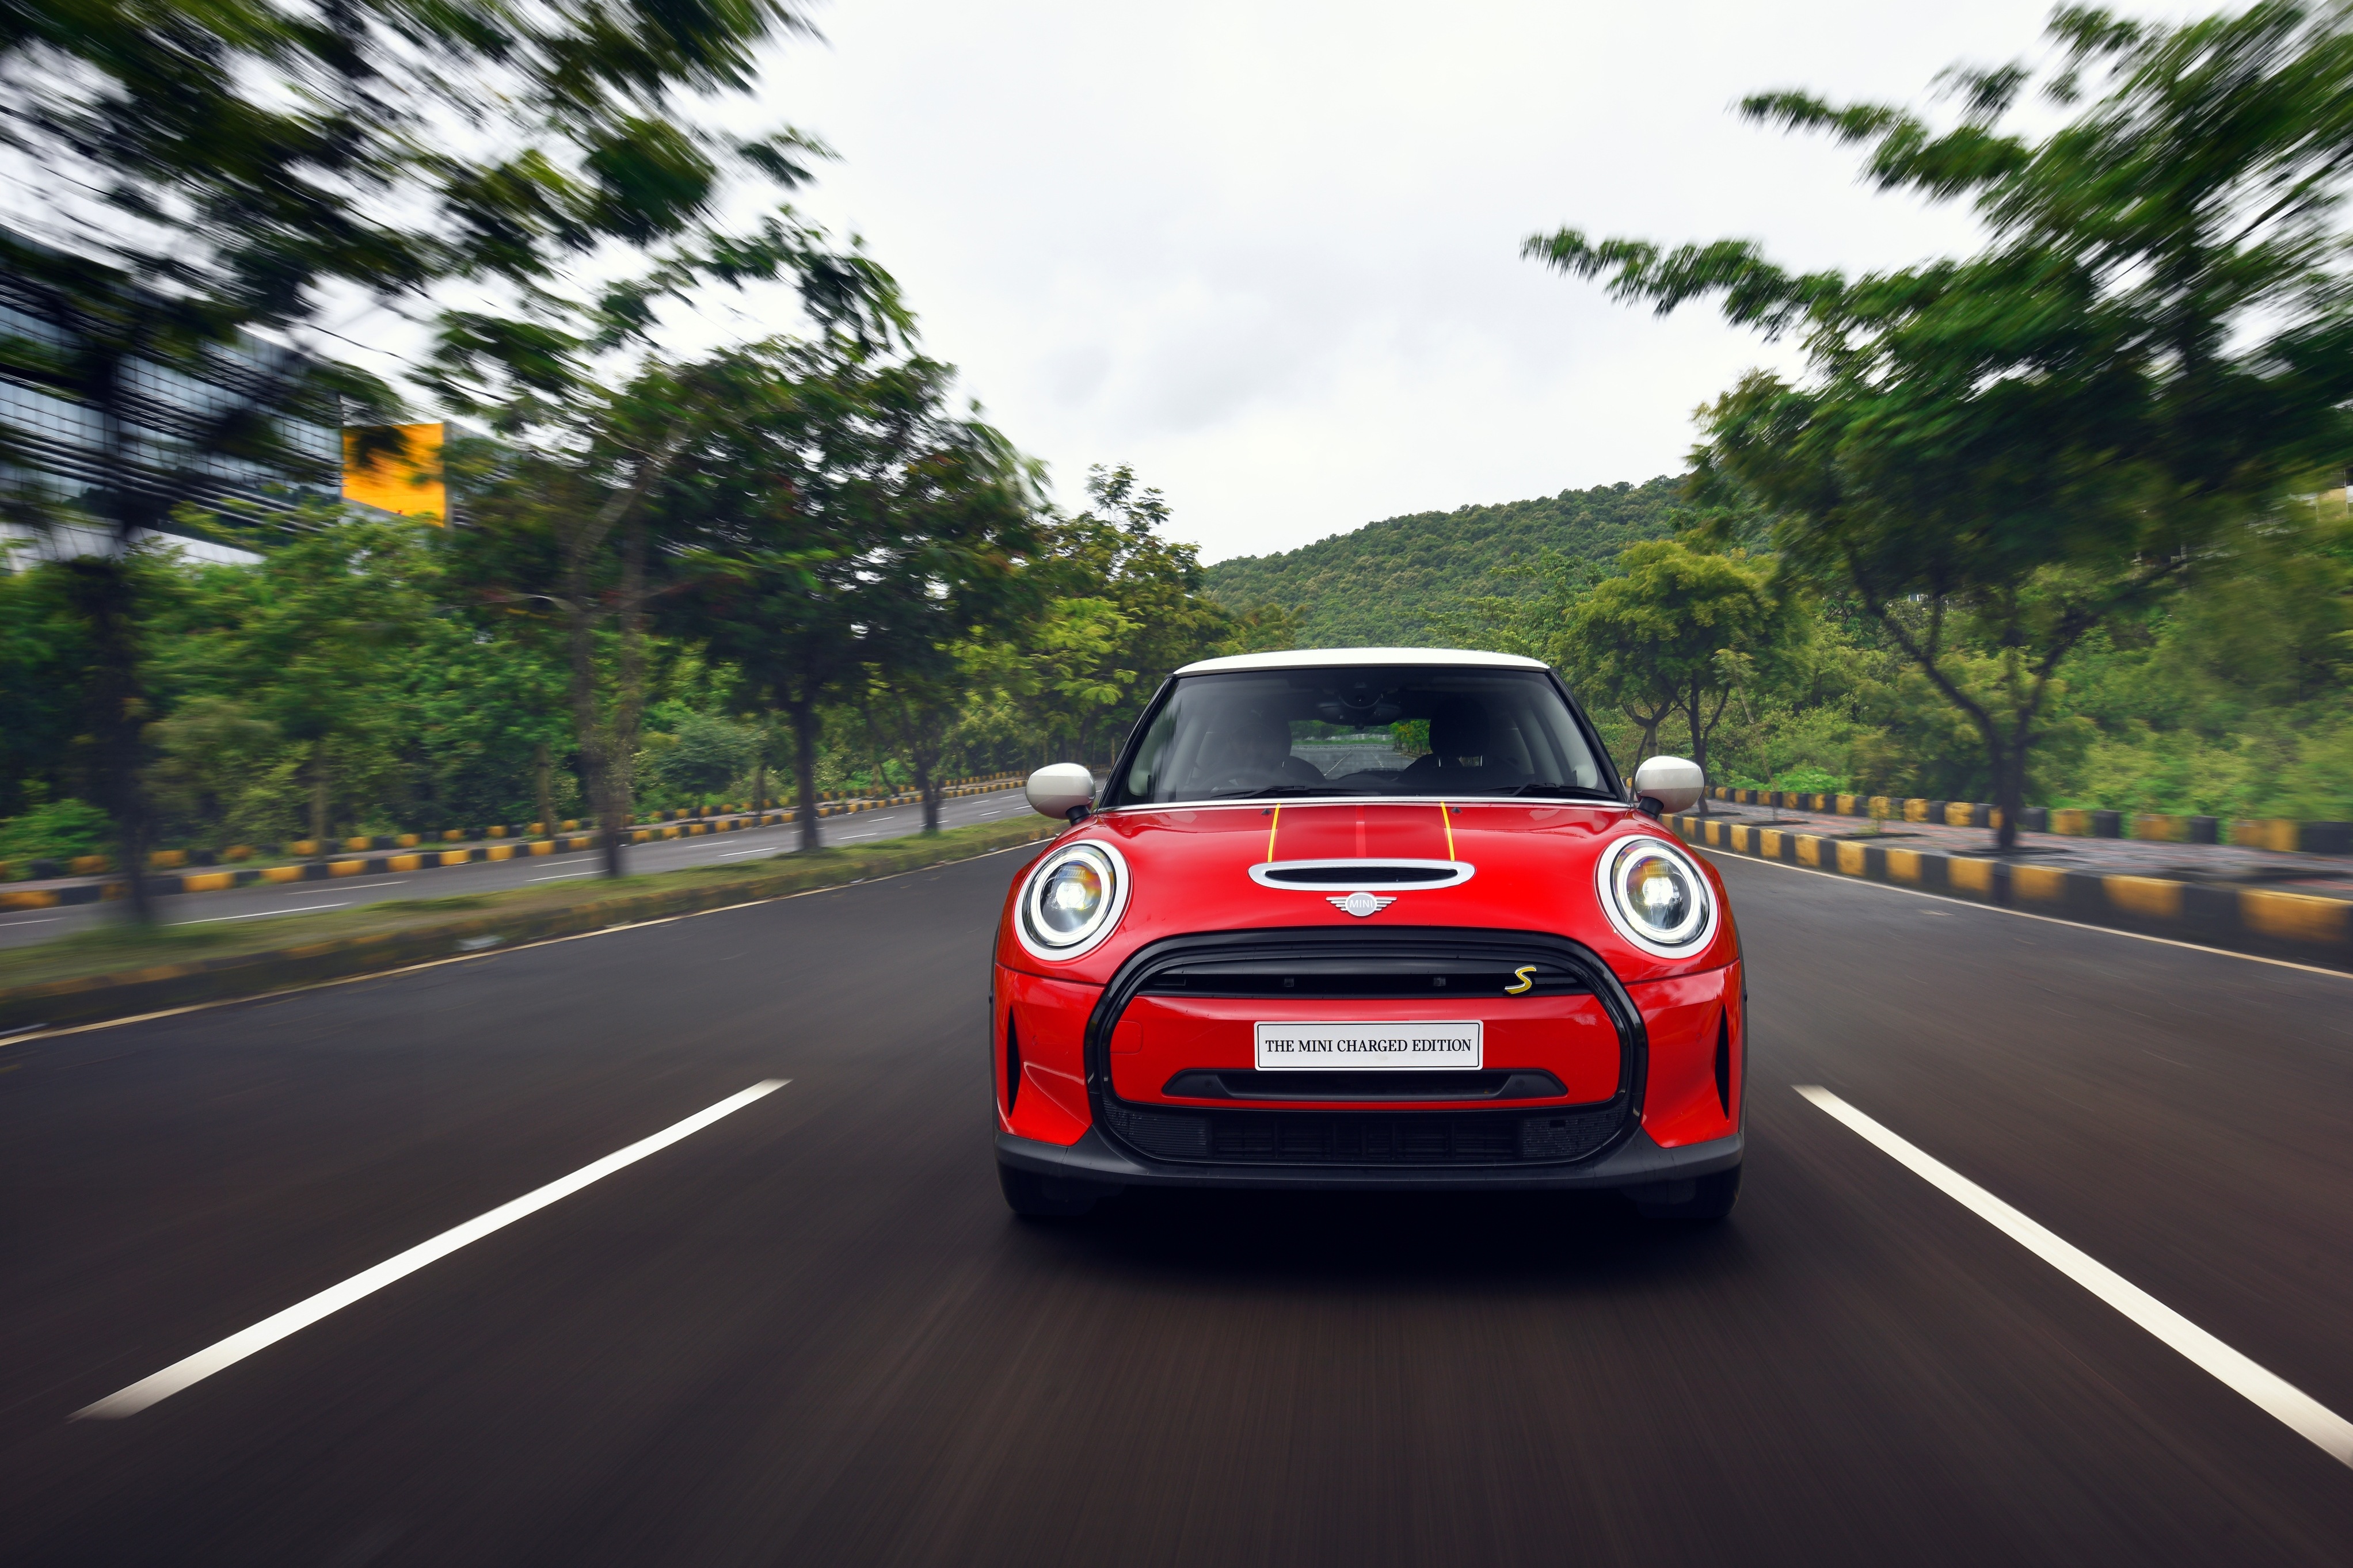 The MINI Charged Edition is limited to just 20 units and comes to India as a CBU